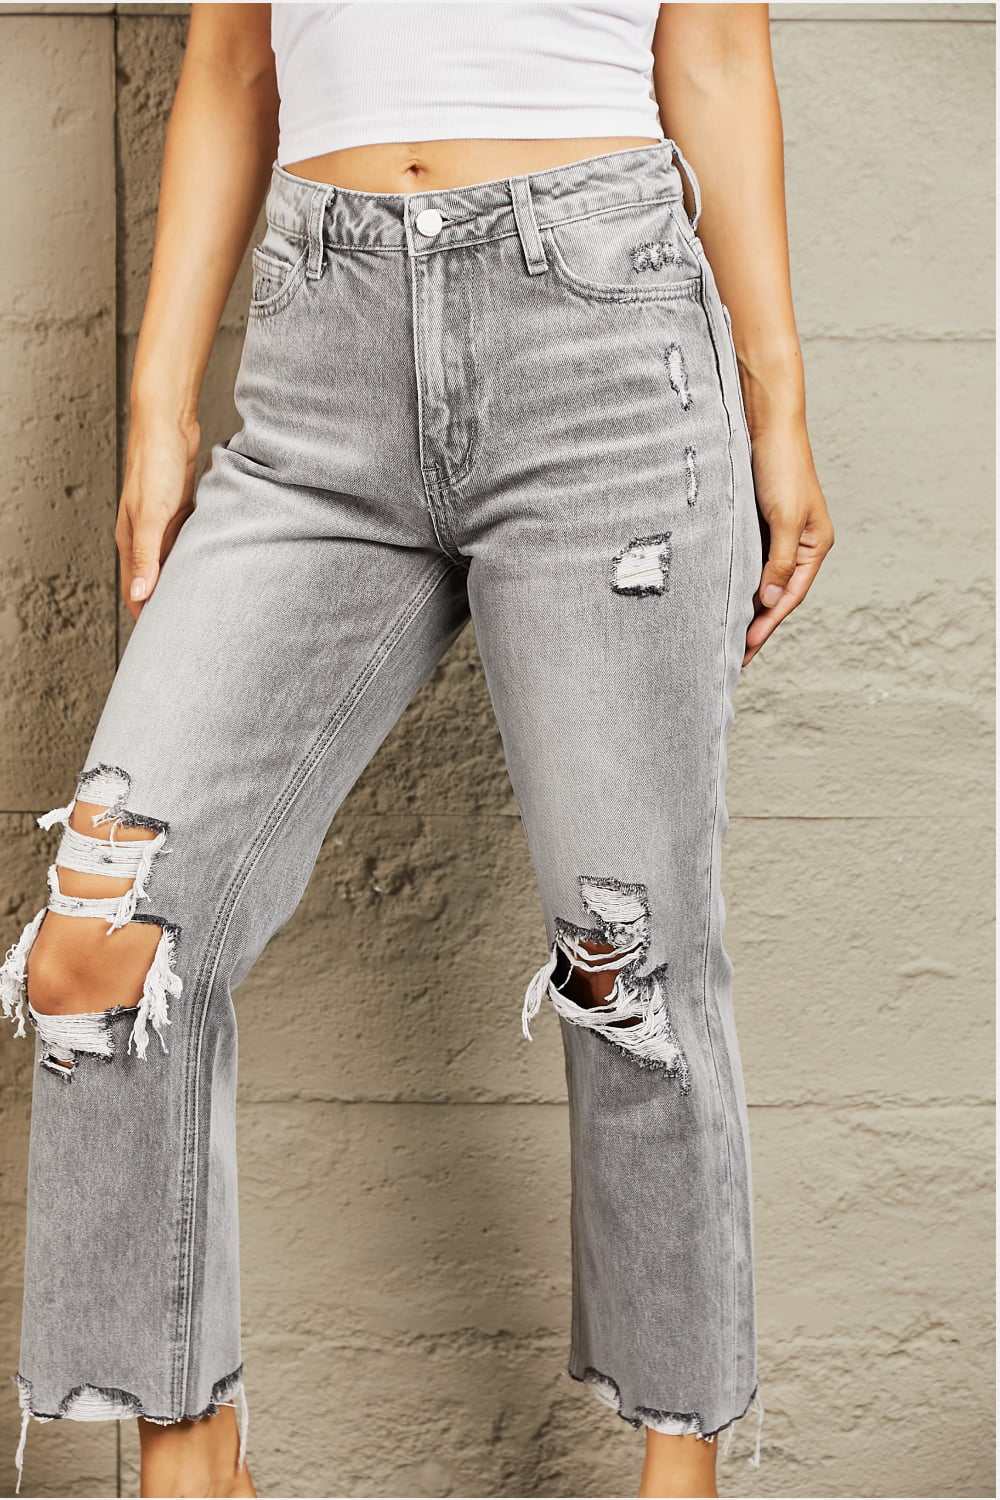 These jeans are crafted from premium quality denim, ensuring a soft and stretchy fit that flatters your curves while providing all-day comfort. The high waist design offers a flattering silhouette, while the trendy distressed details add a touch of edginess to your outfit. 